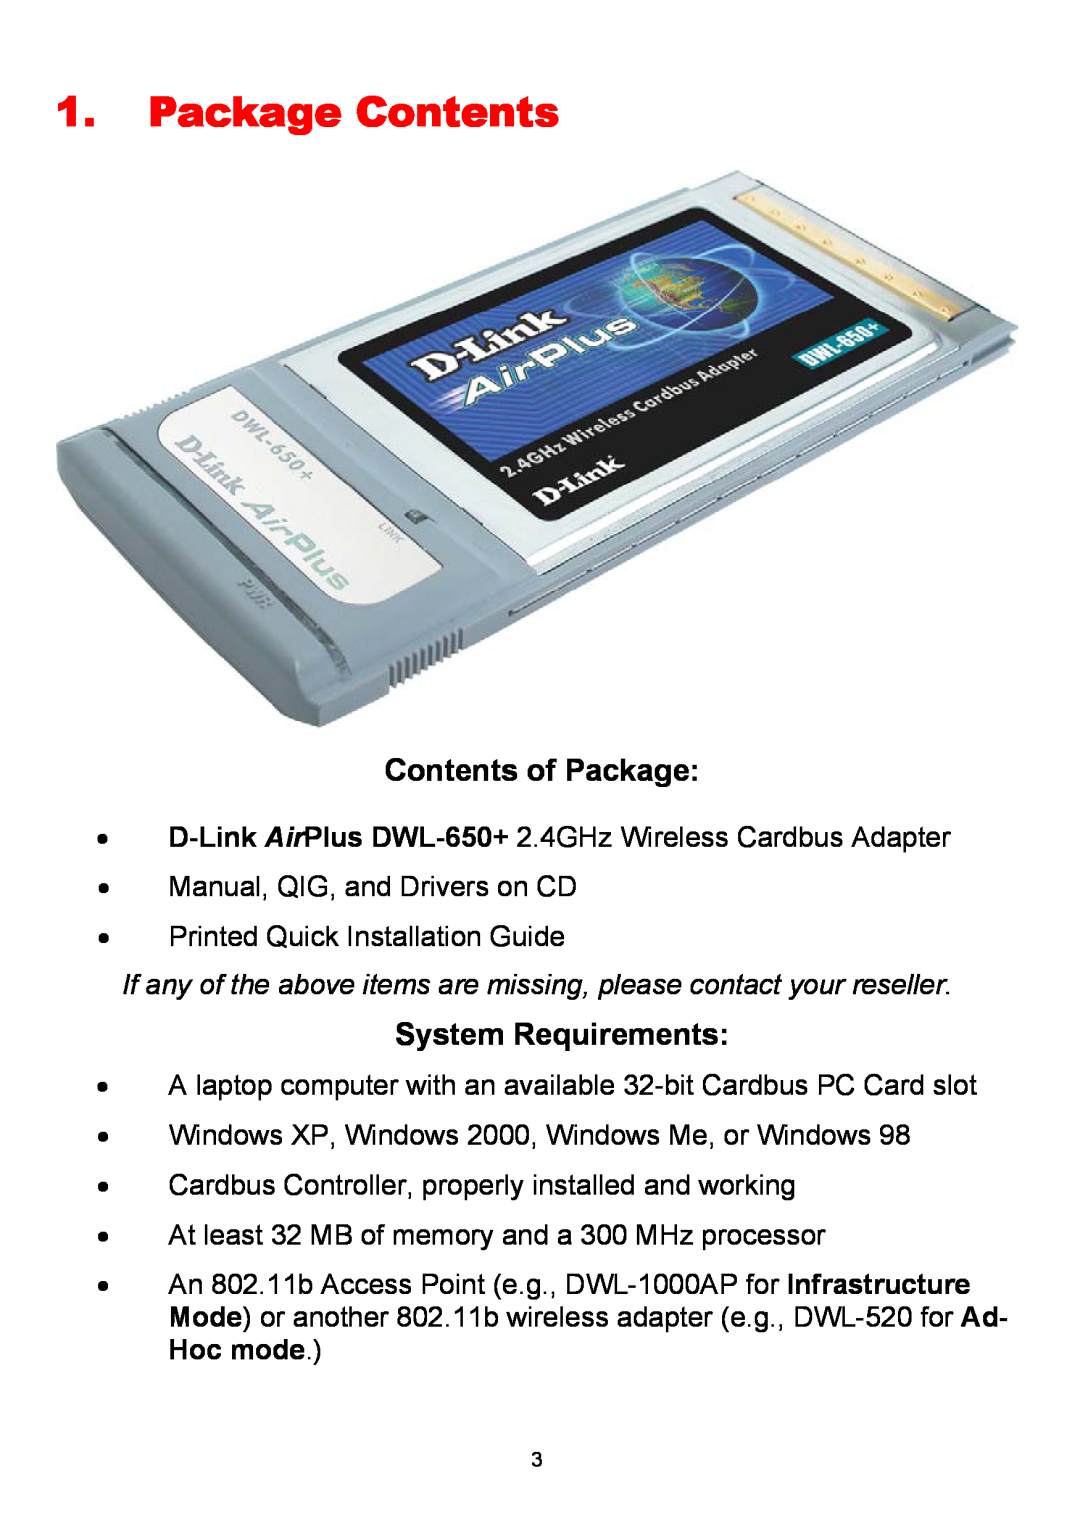 D-Link DWL-650+ manual Package Contents, Contents of Package, System Requirements 